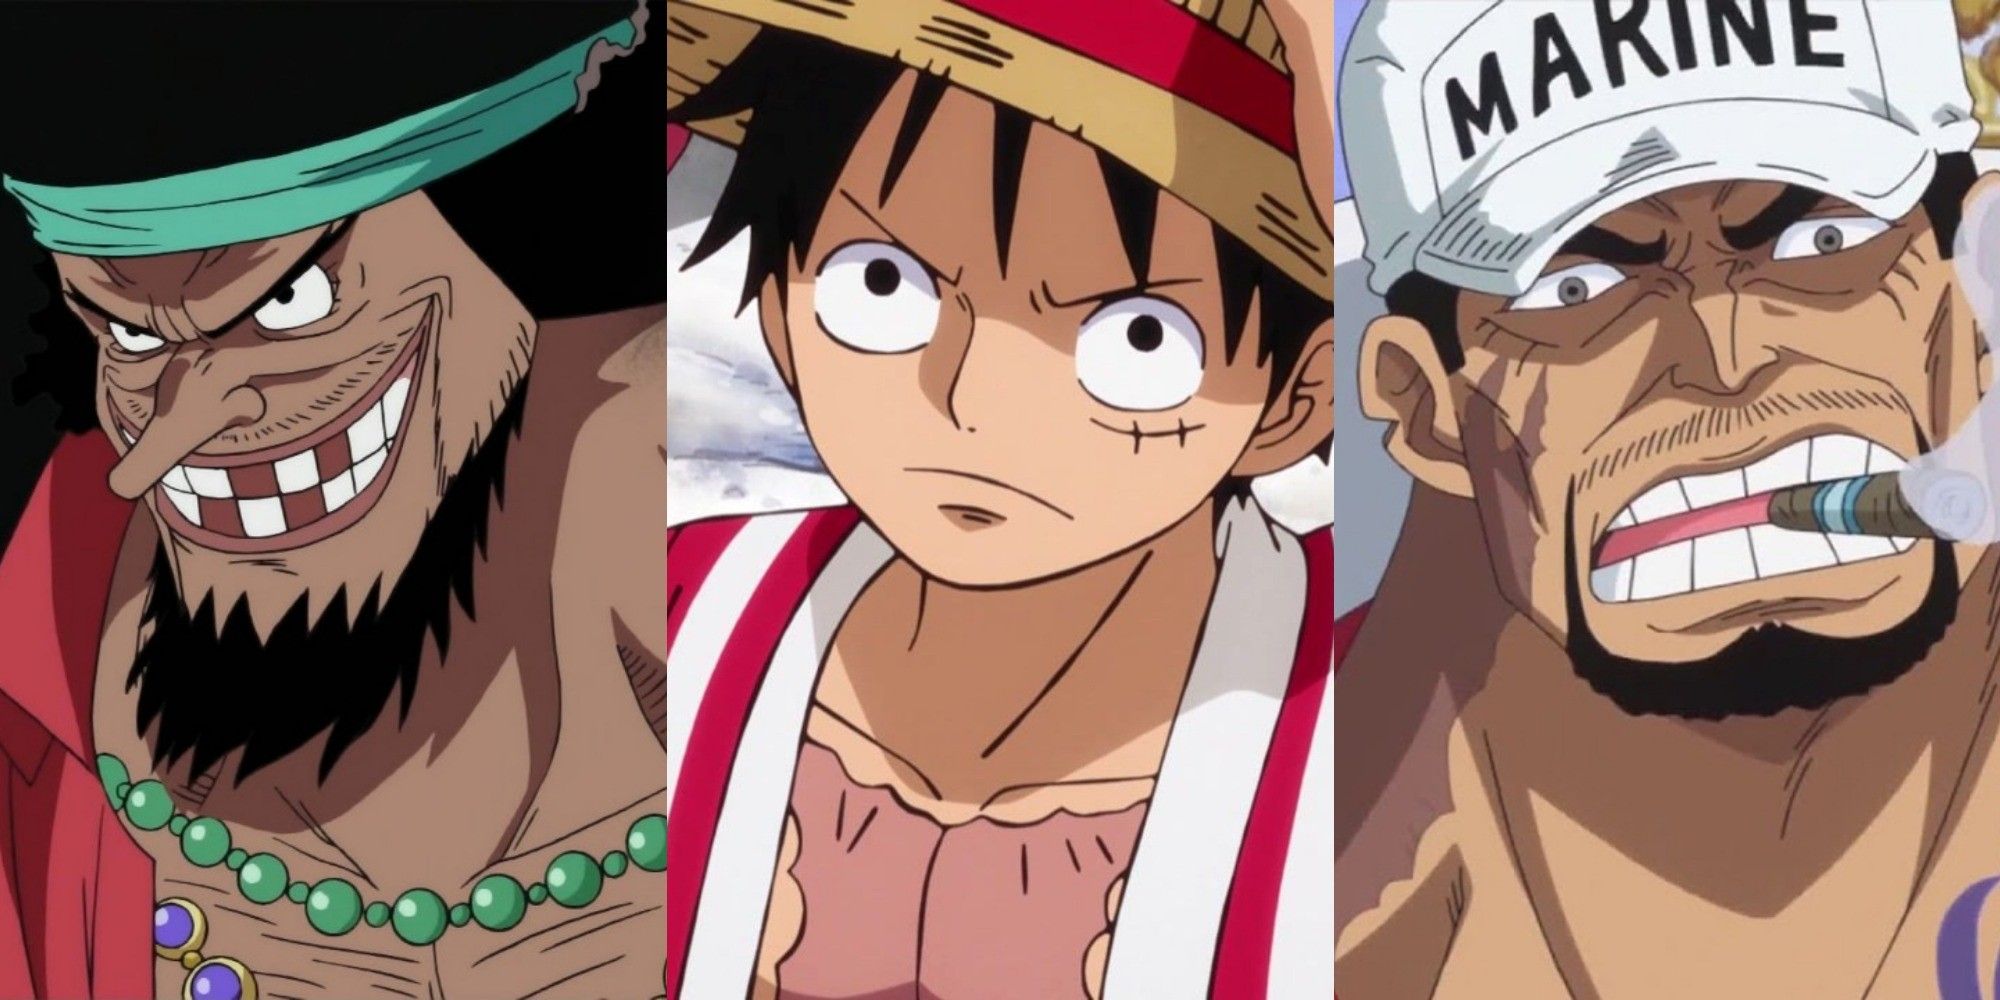 From left to right: Blackbeard, Luffy, and Akainu from One Piece